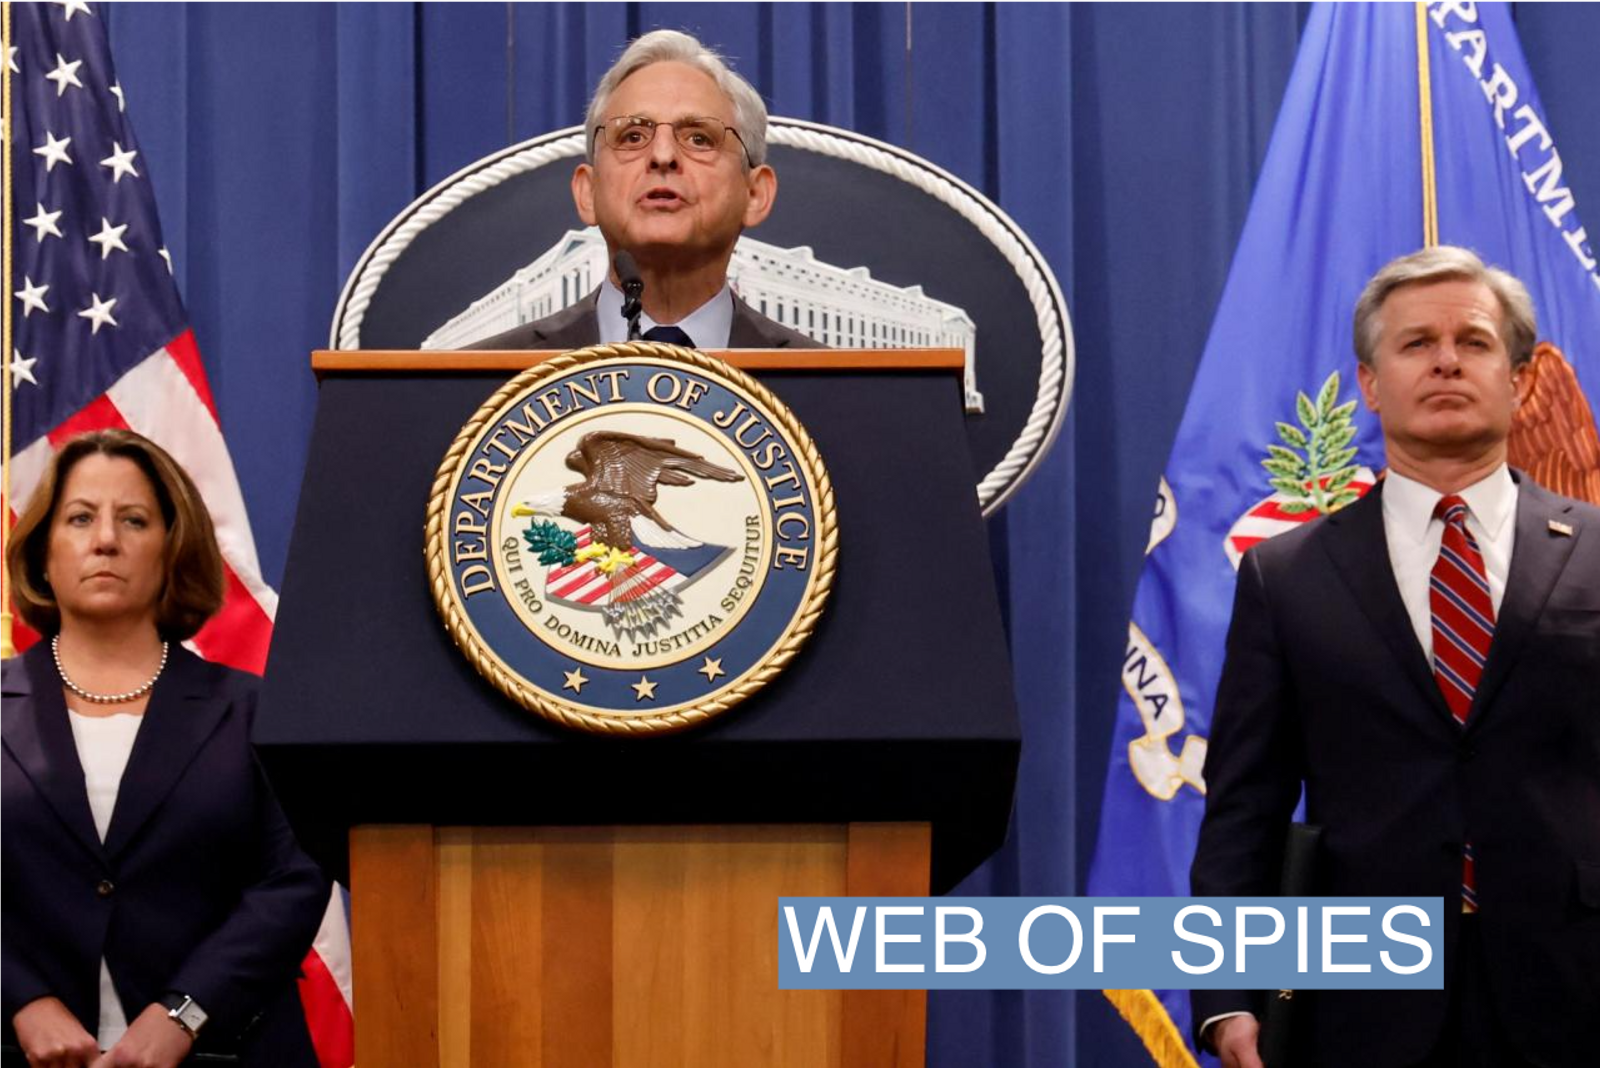 U.S. Attorney General Merrick Garland, joined by Deputy Attorney General Lisa Monaco and Federal Bureau of Investigation (FBI) Director Christopher Wray, at the Justice Department in Washington, U.S. October 24, 2022.